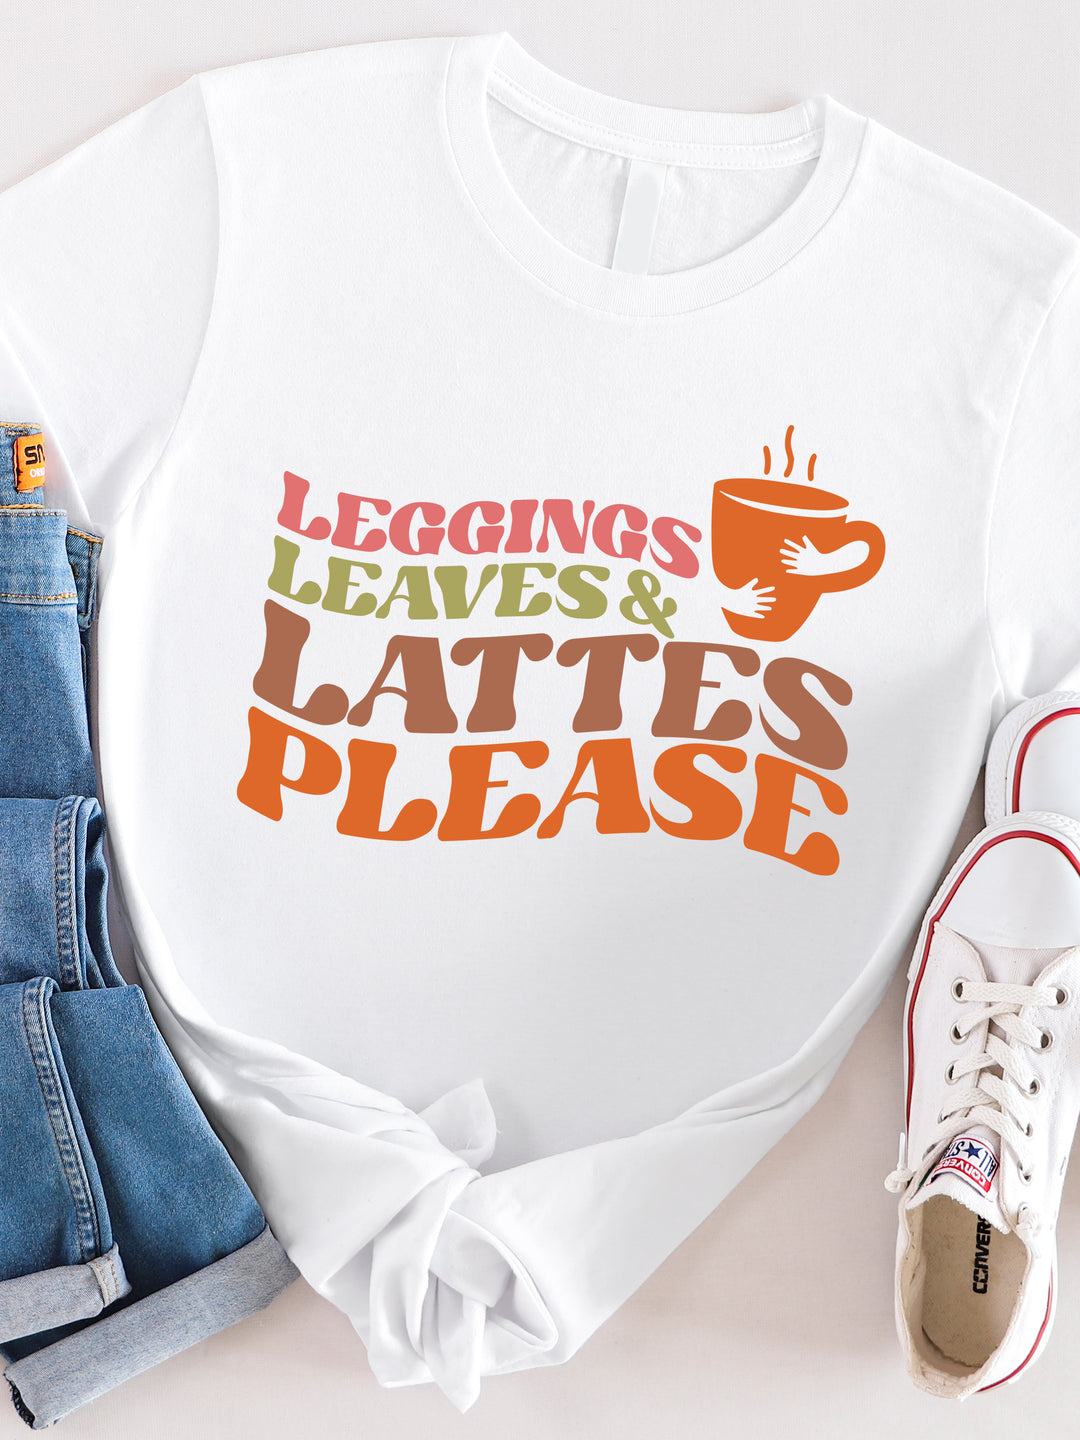 Leggings Leaves And Lattes Please Graphic Tee